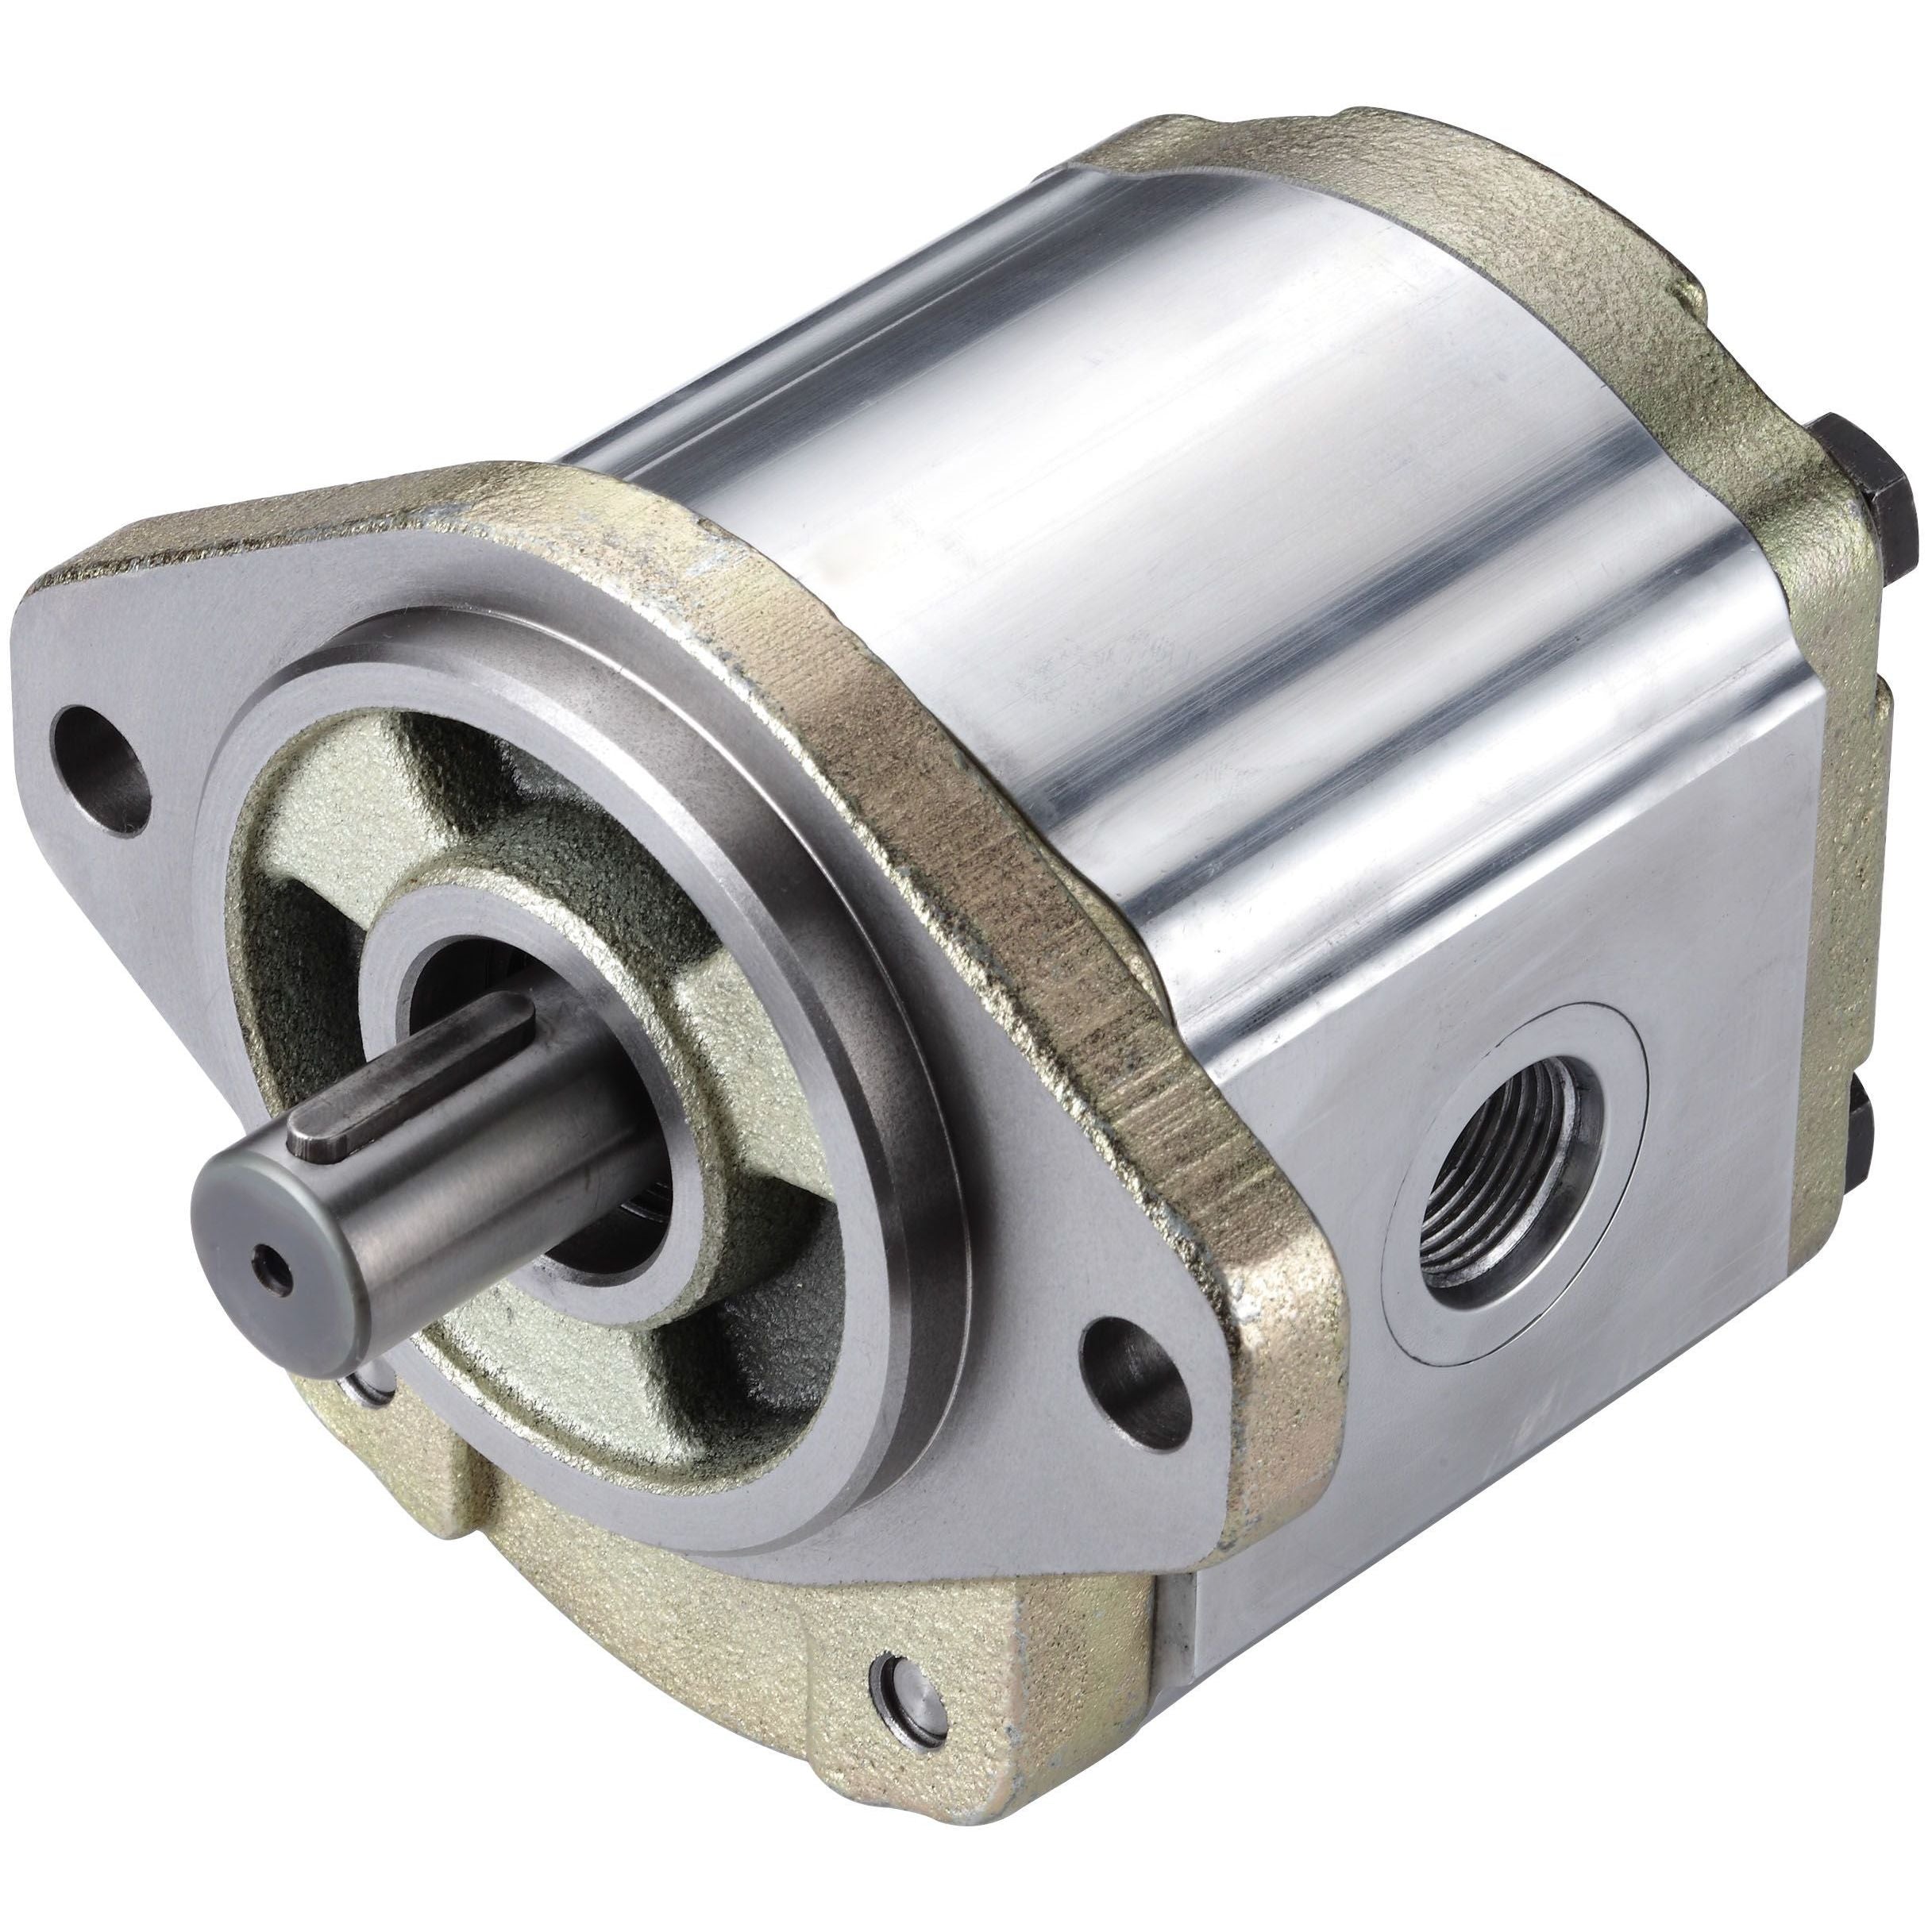 3GB8ZU138L : Honor Gear Pump, CCW Rotation, 38cc (2.32in3), 18.07 GPM, 3500psi, 3000 RPM, #16 SAE (1") In, #12 SAE (3/4") Out, Splined Shaft 13-Tooth, 16/32 Pitch, SAE B 2-Bolt Mount